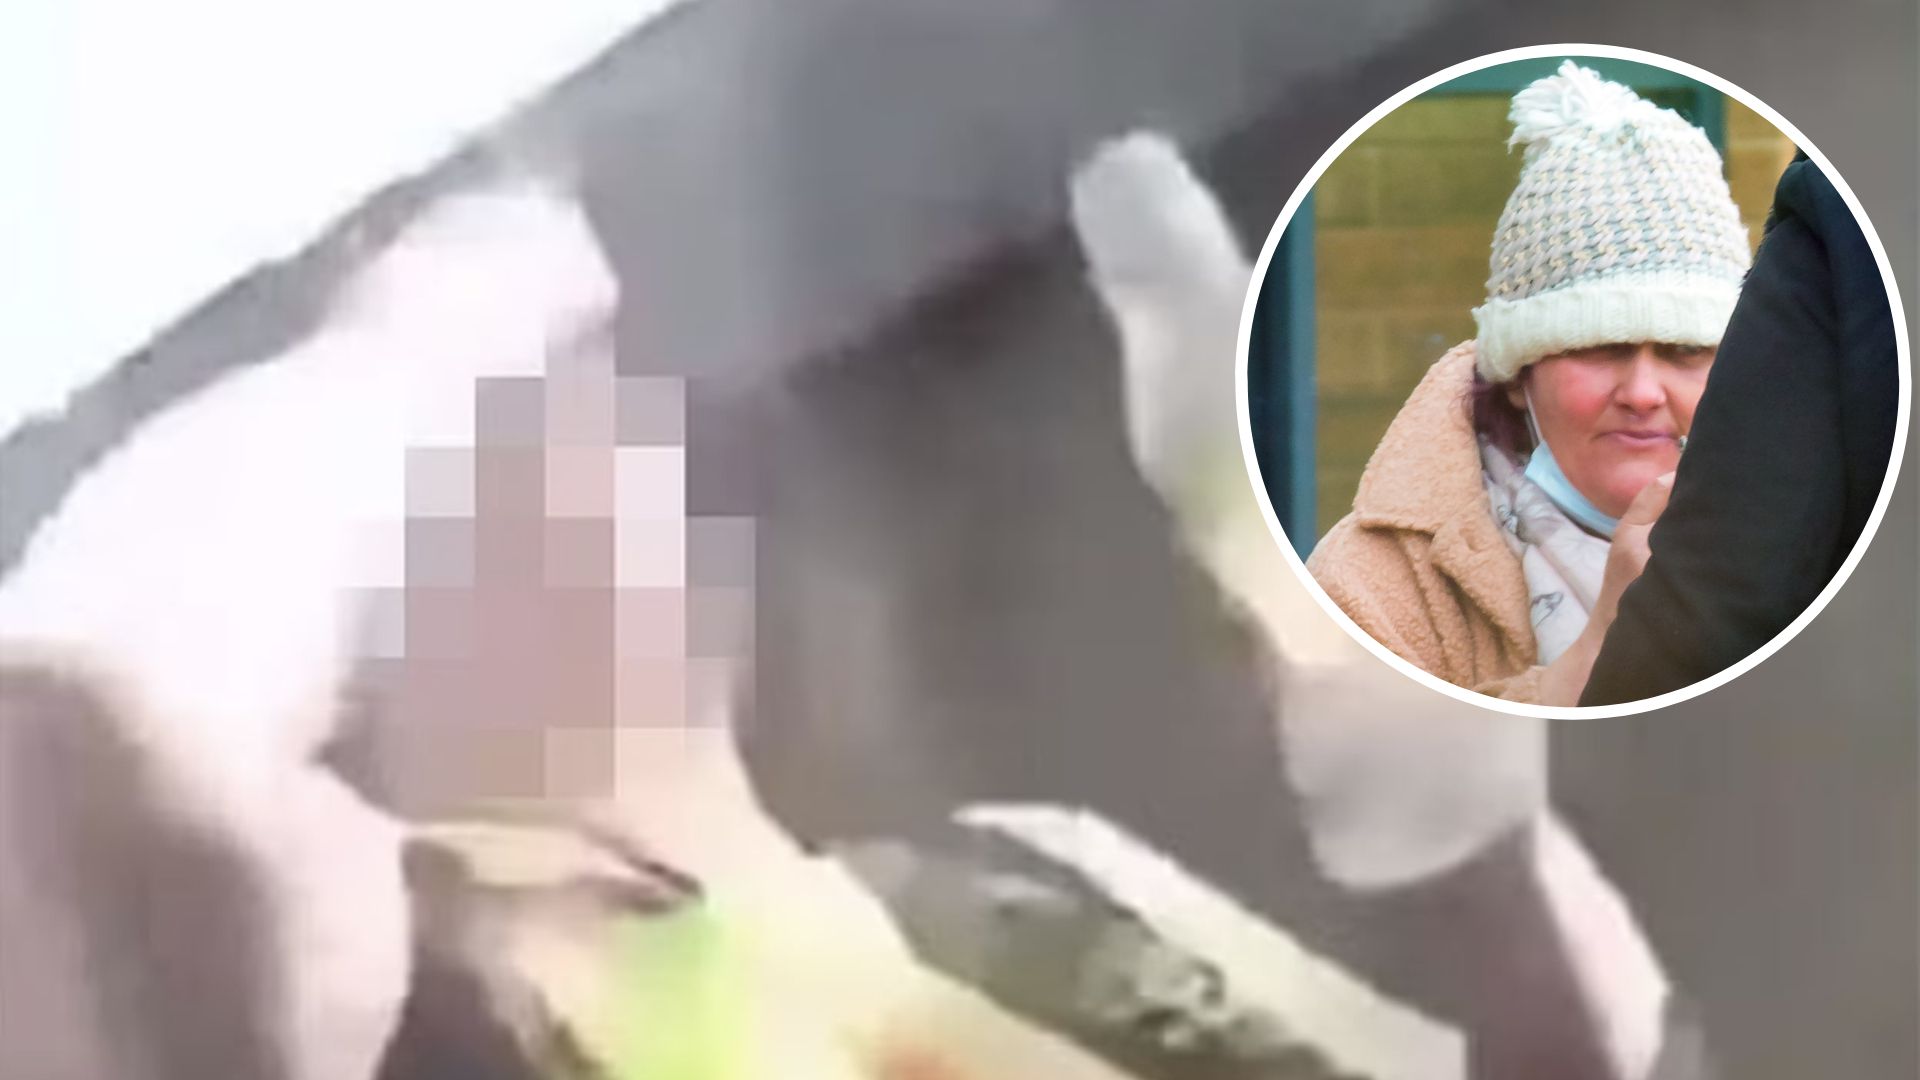 Woman who ate hamster in 'abhorrent' video jailed | ITV News Calendar